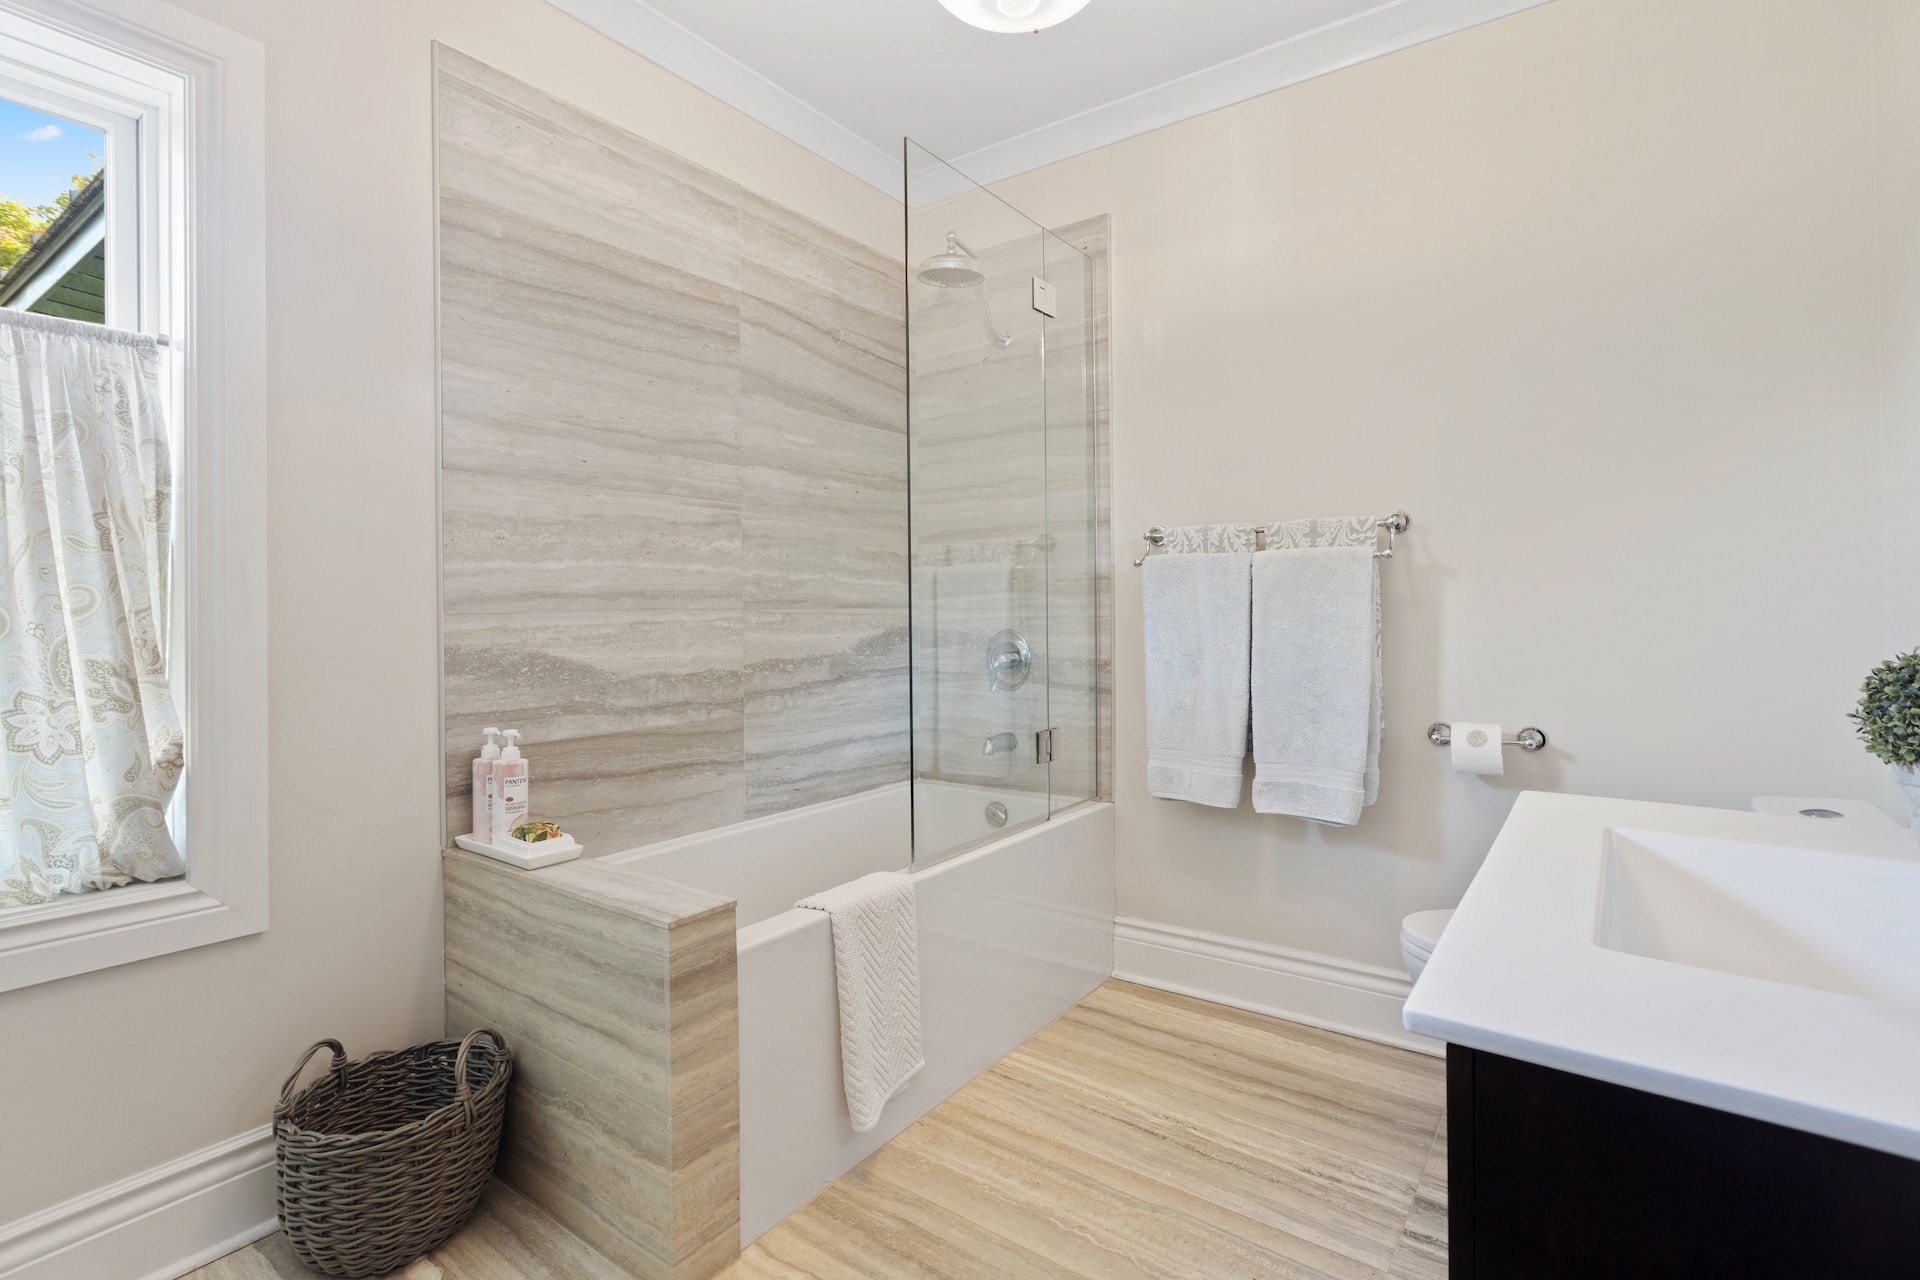 Luxury Bathrooms in Royal Oak: Expert Remodeling Services That Impress